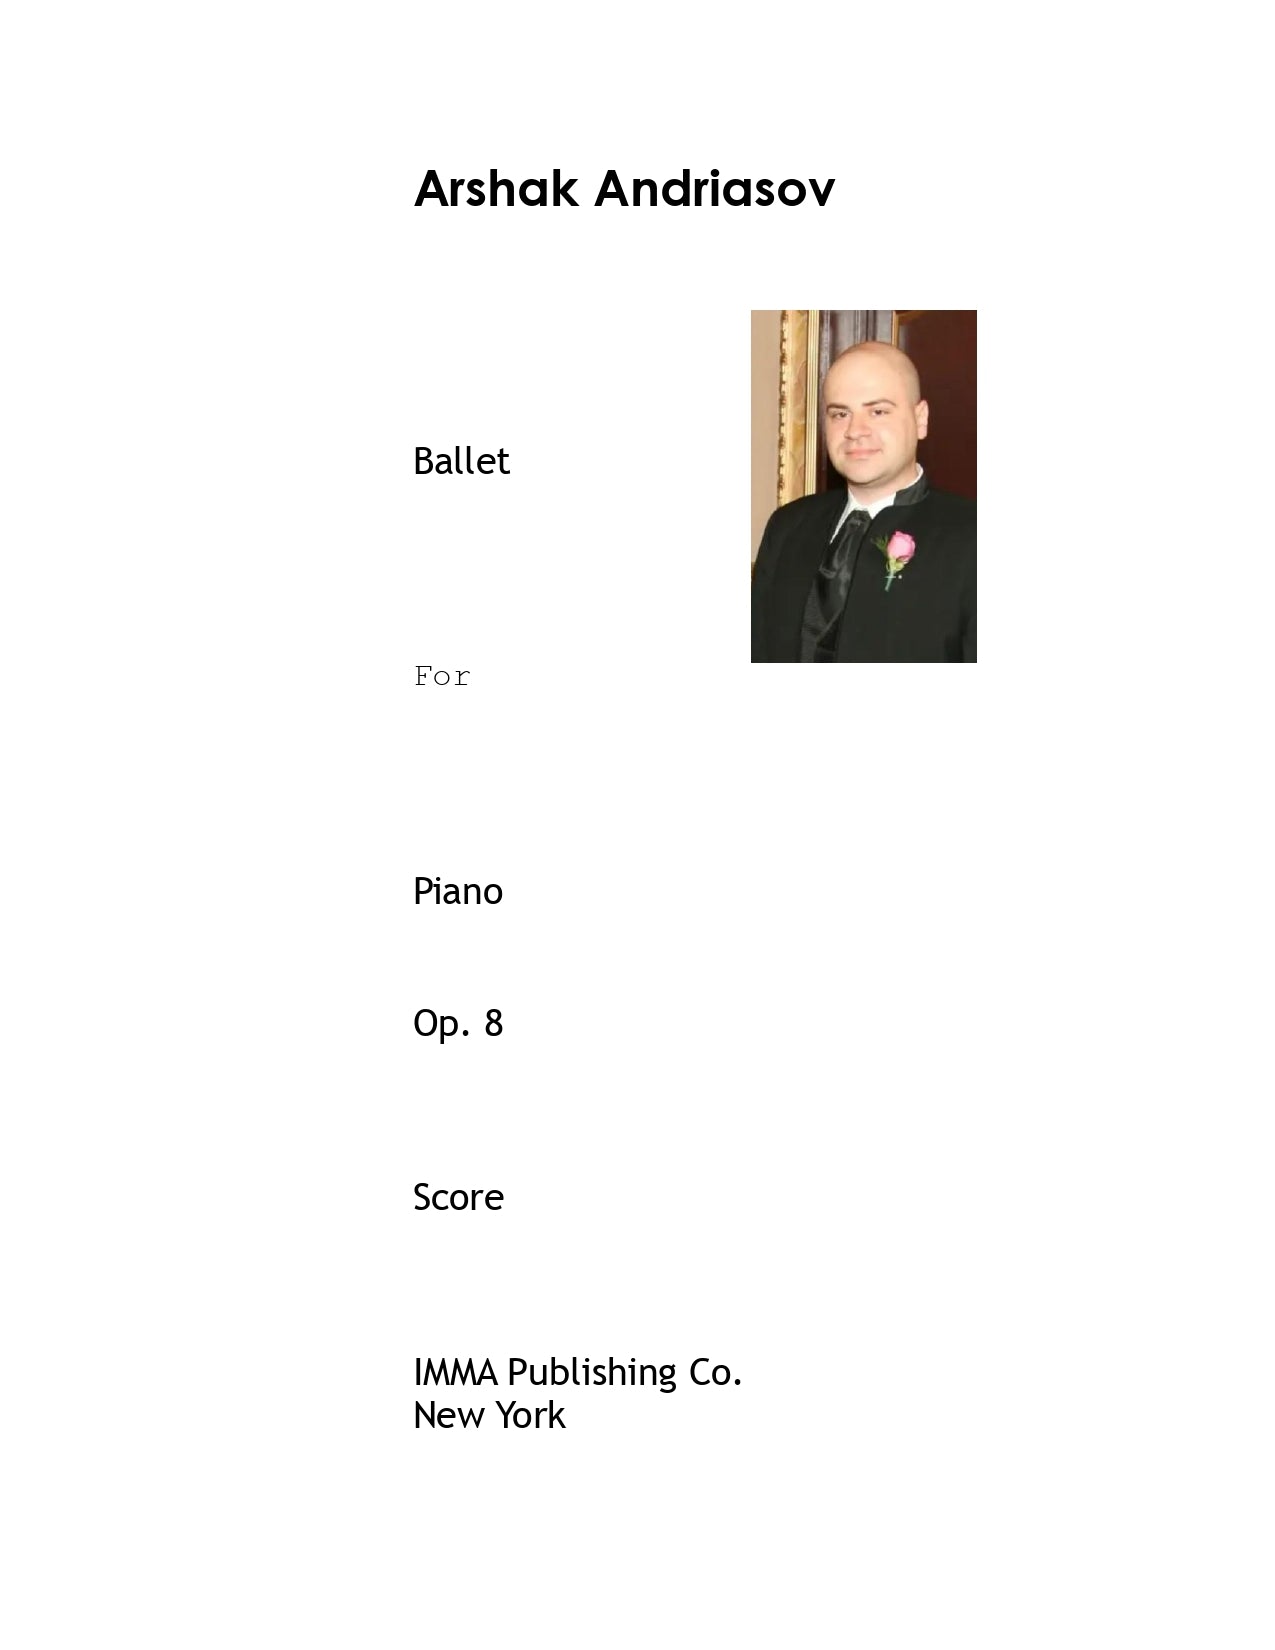 097. Arshak Andriasov: Ballet, Op. 8 for Piano (PDF)